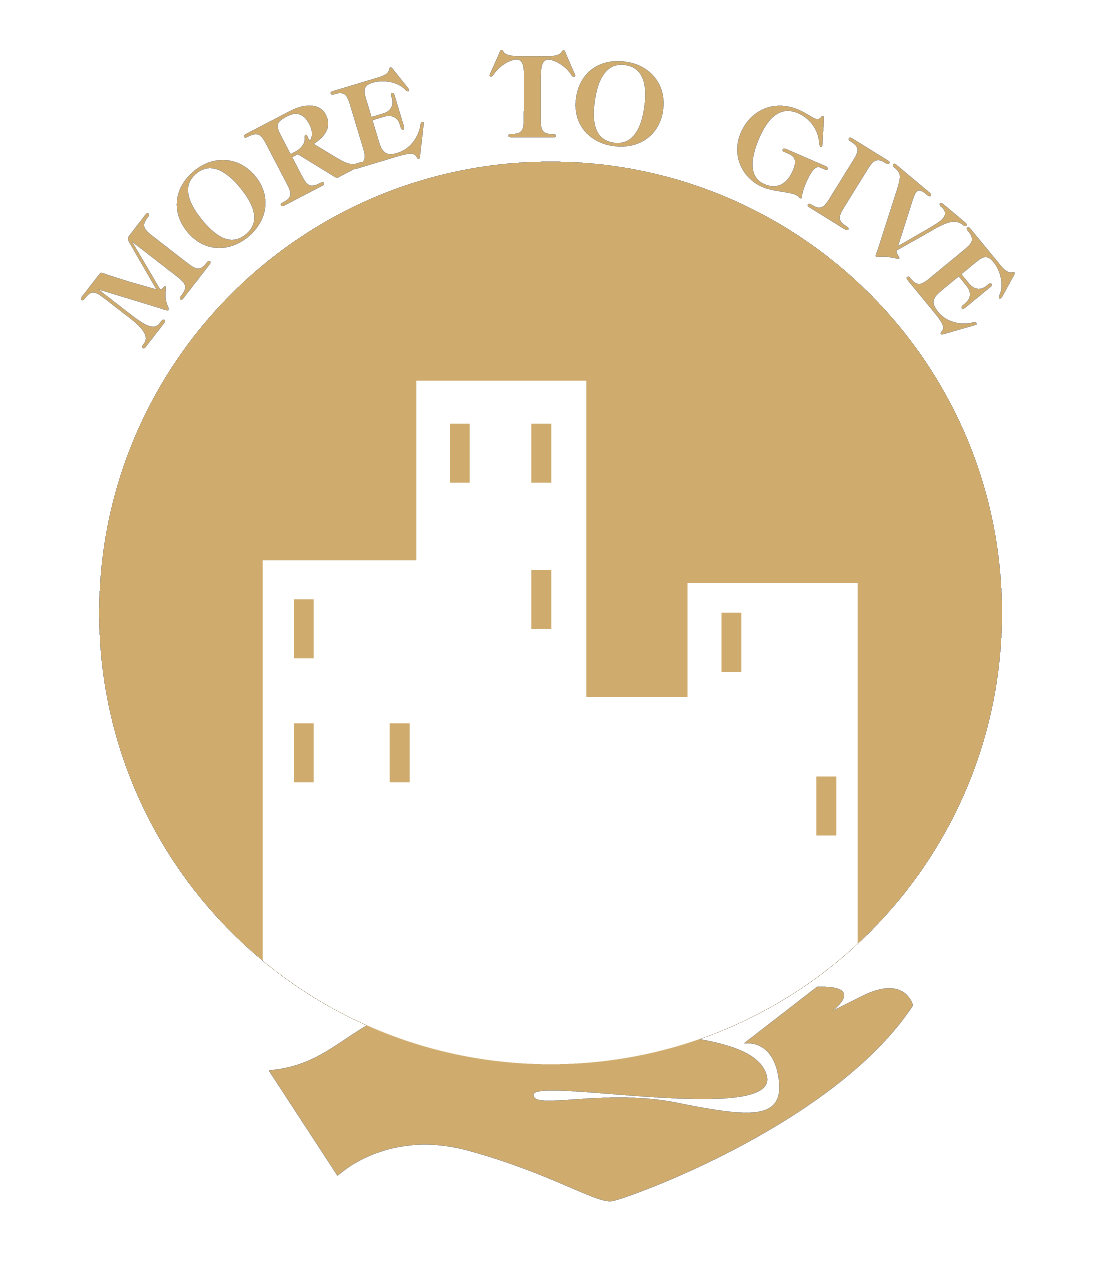 More To Give - MAK